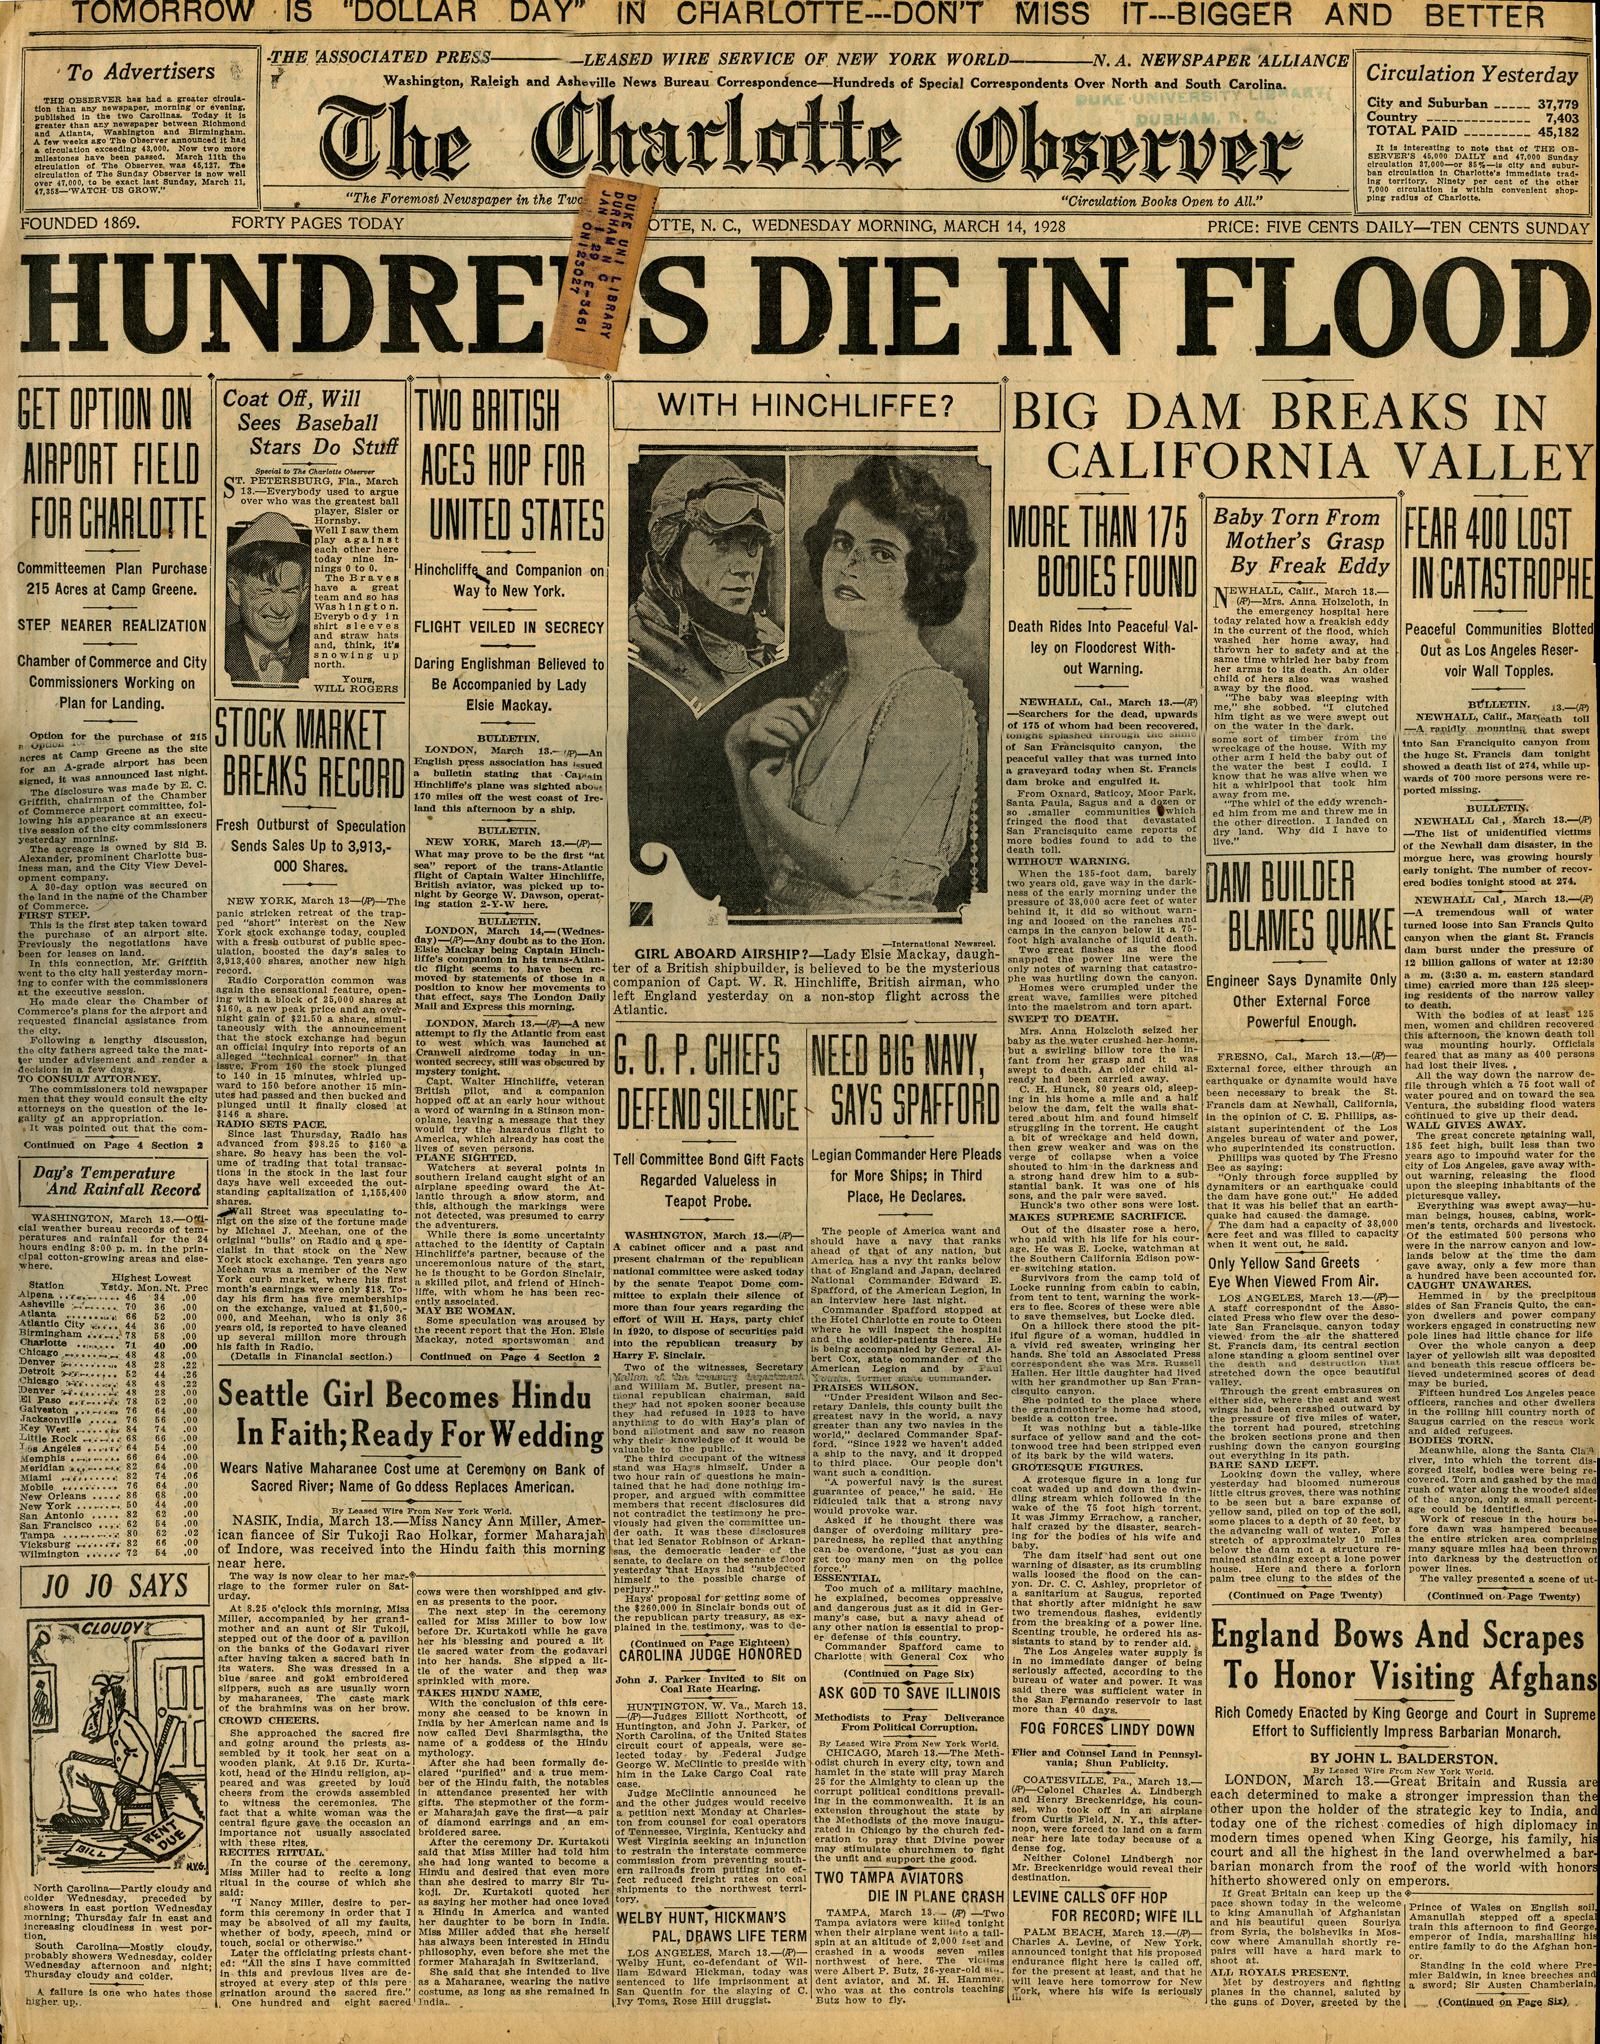 St. Francis Dam Disaster.

THE CHARLOTTE OBSERVER (NEWSPAPER),

WEDNESDAY, MARCH 14, 1928